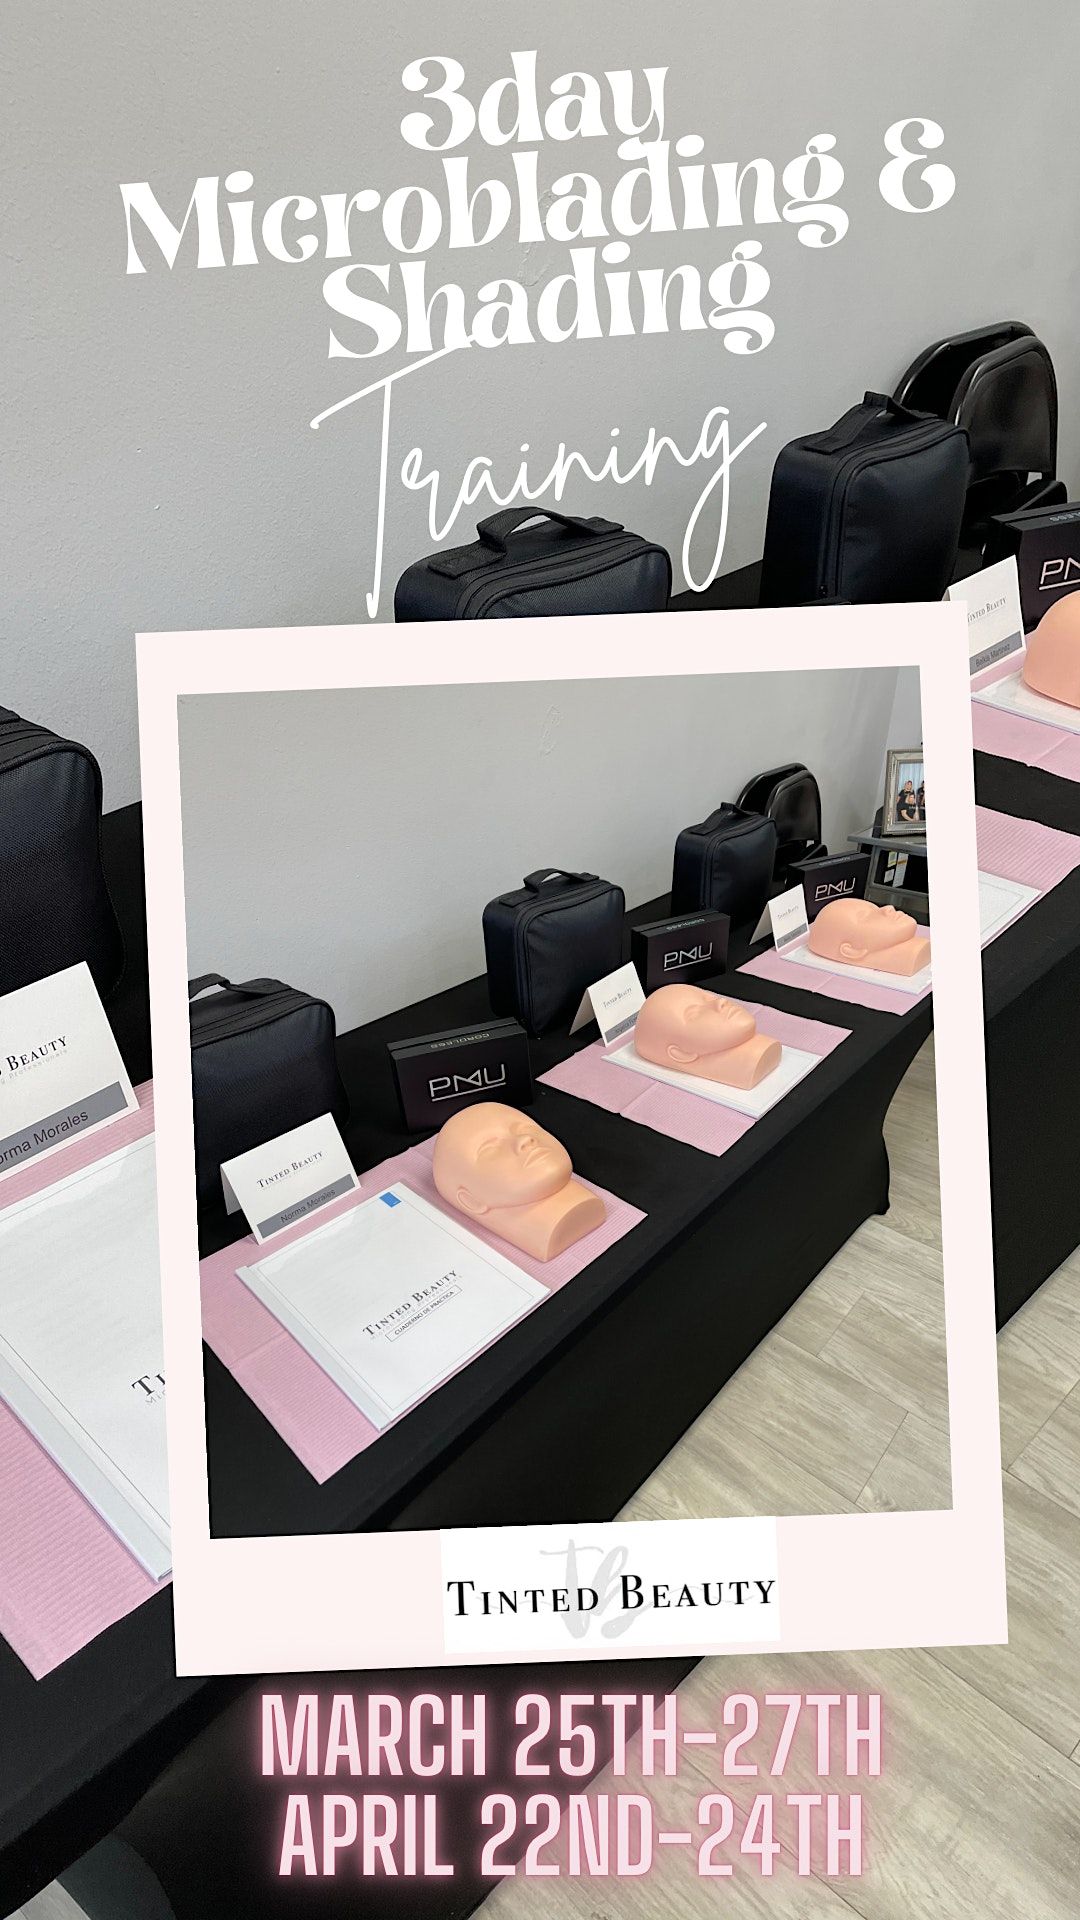 Your choice training(May): Microblading, Ombre, and Combo Brow Course